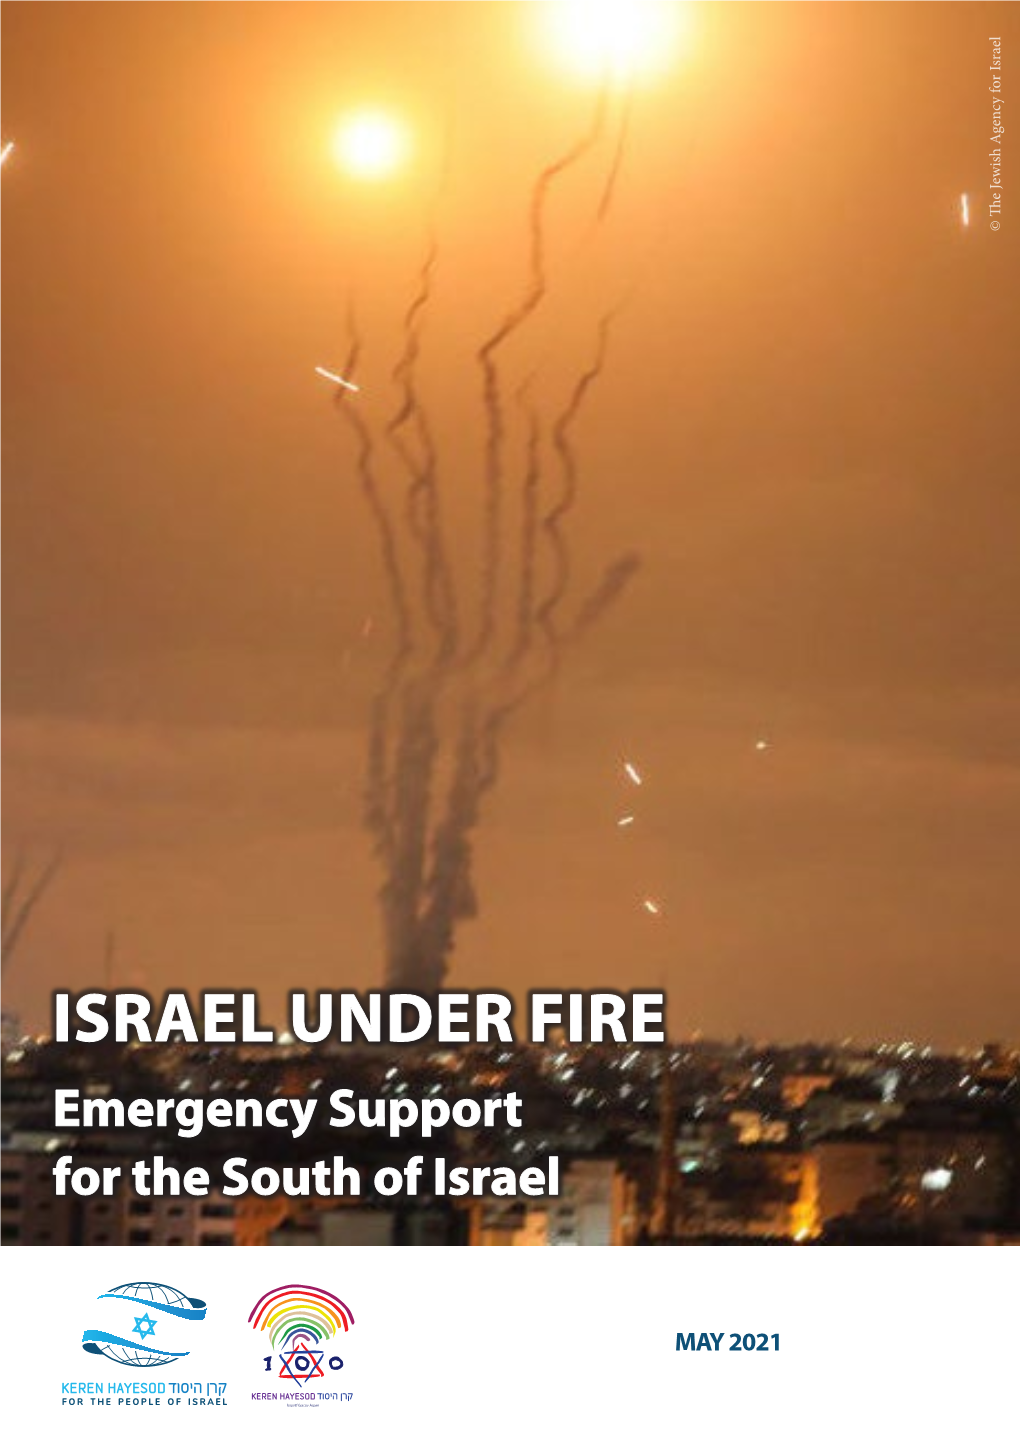 ISRAEL UNDER FIRE Emergency Support for the South of Israel